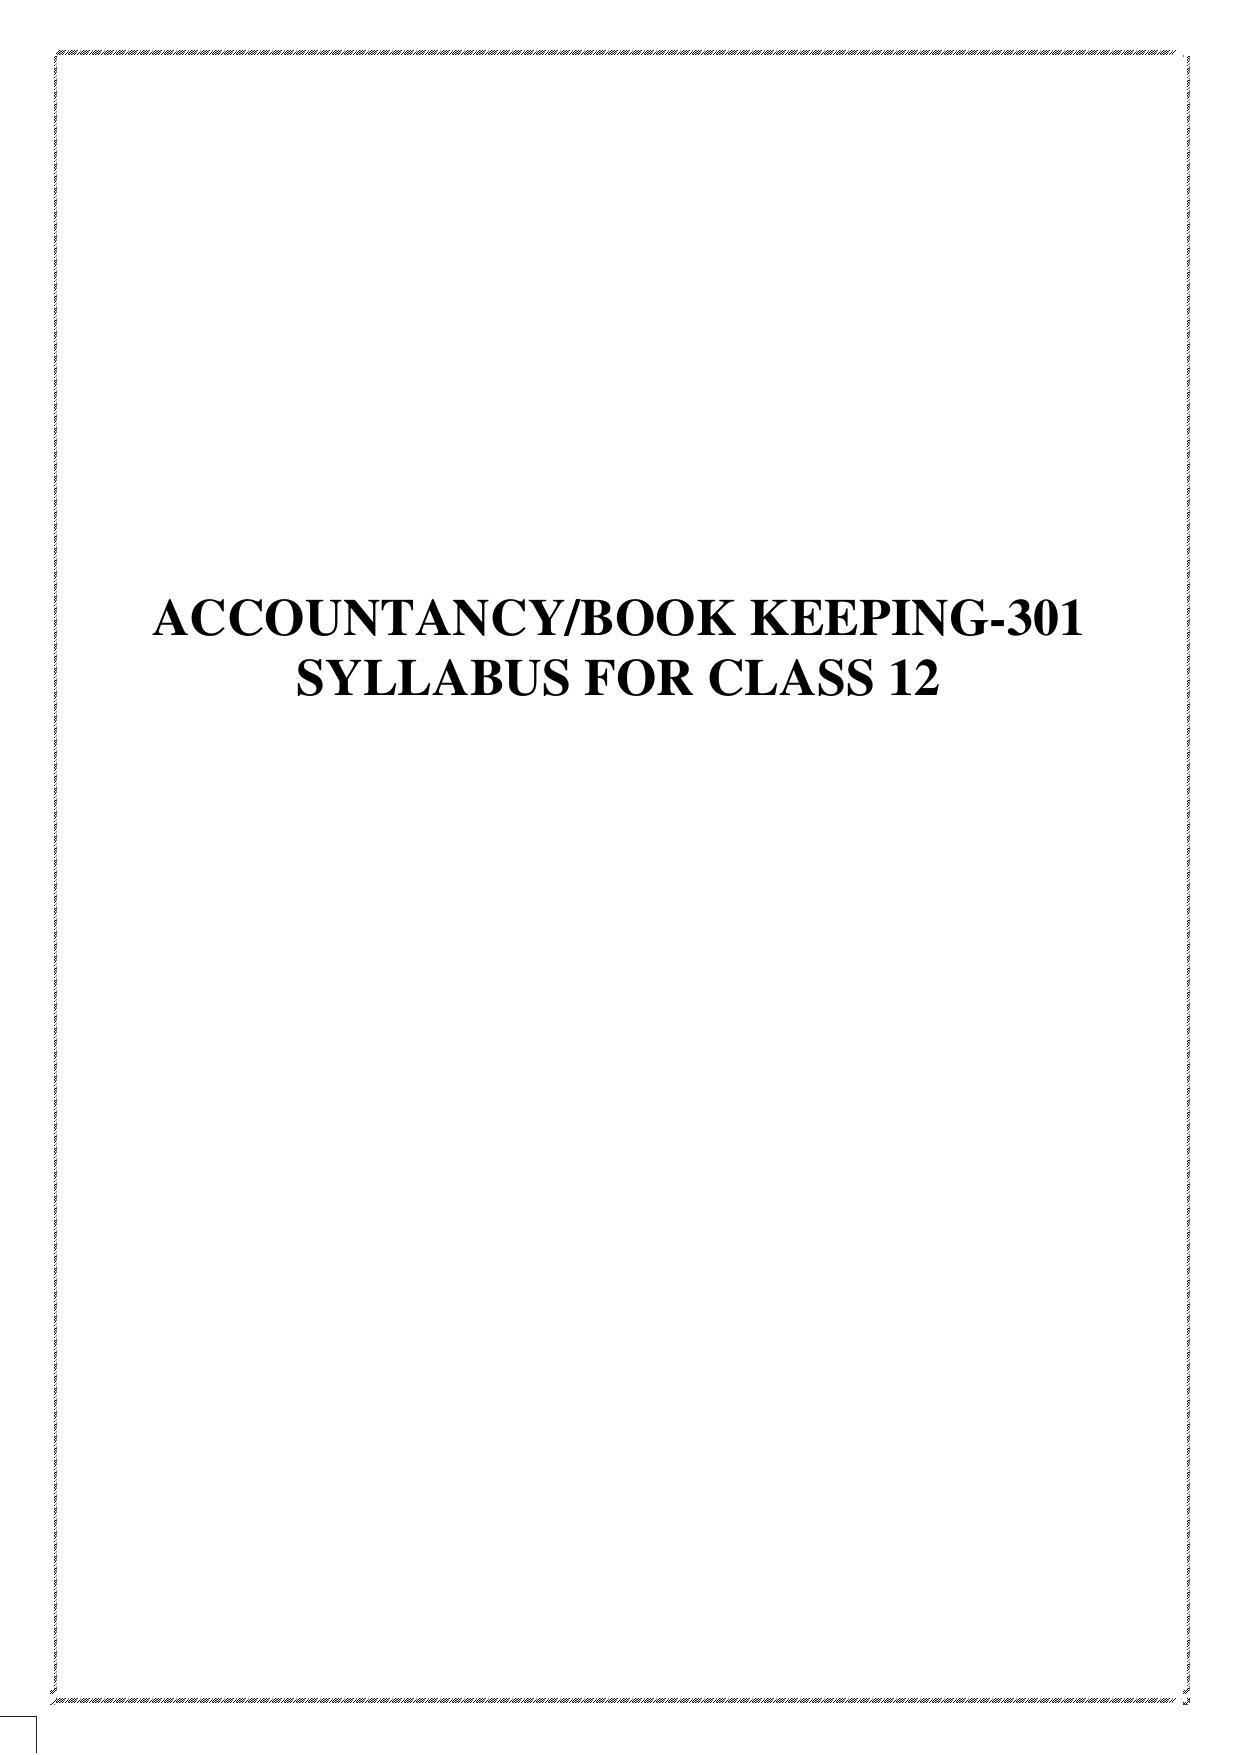 CUET Syllabus for Accountancy (English) - Page 1